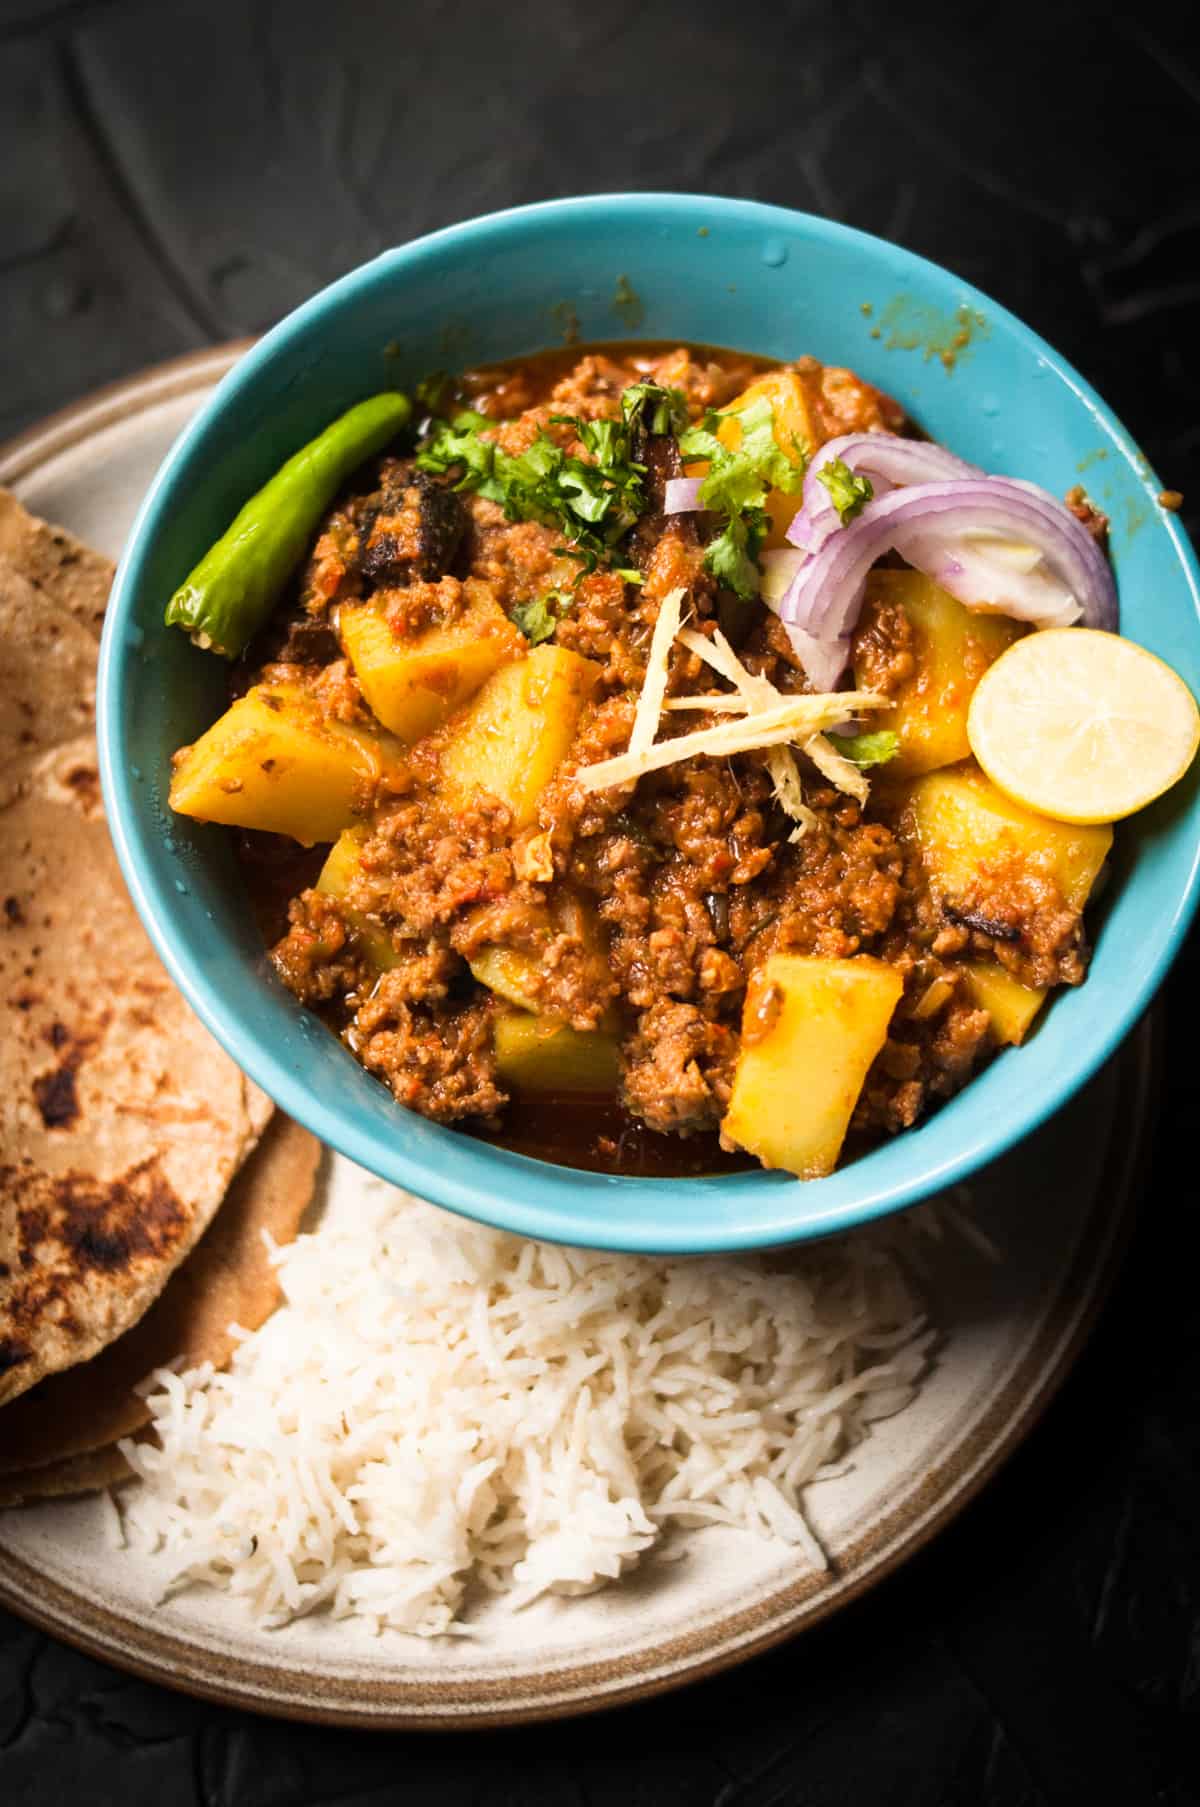 Aloo keema served served in a blue bowl over a black background.